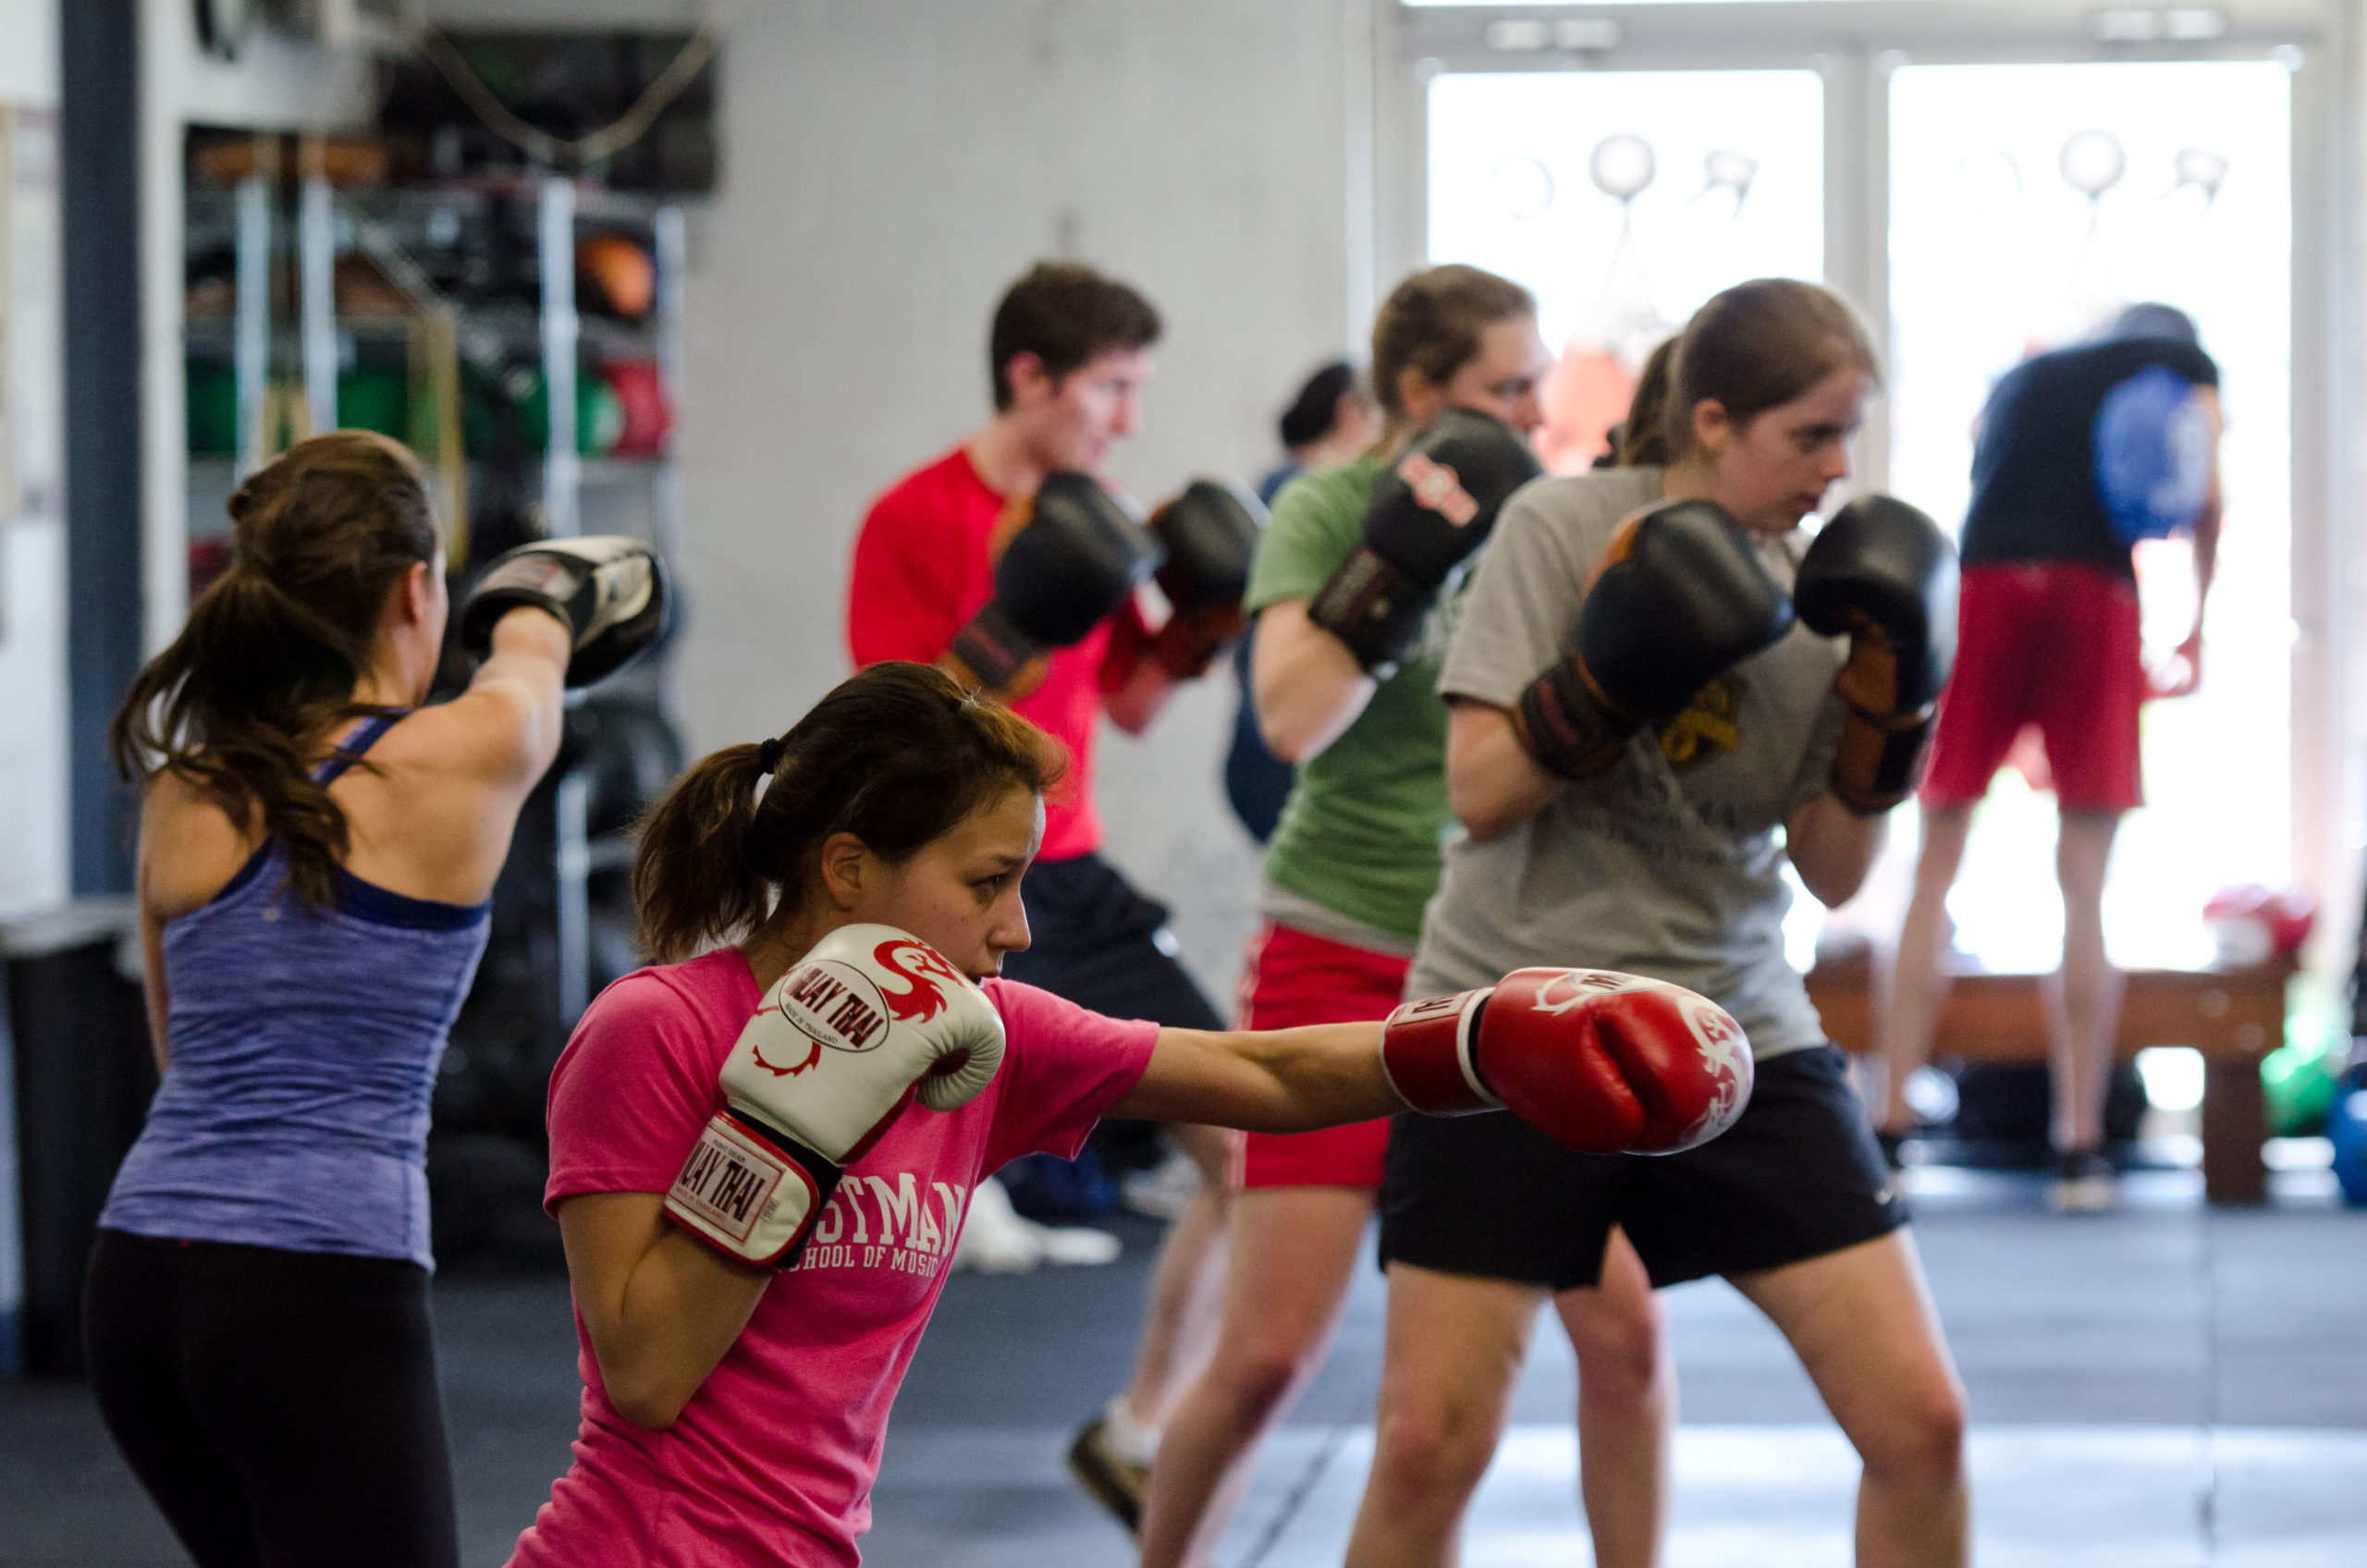 Female and male students at the University of Rochester participating in a boxing fitness class.